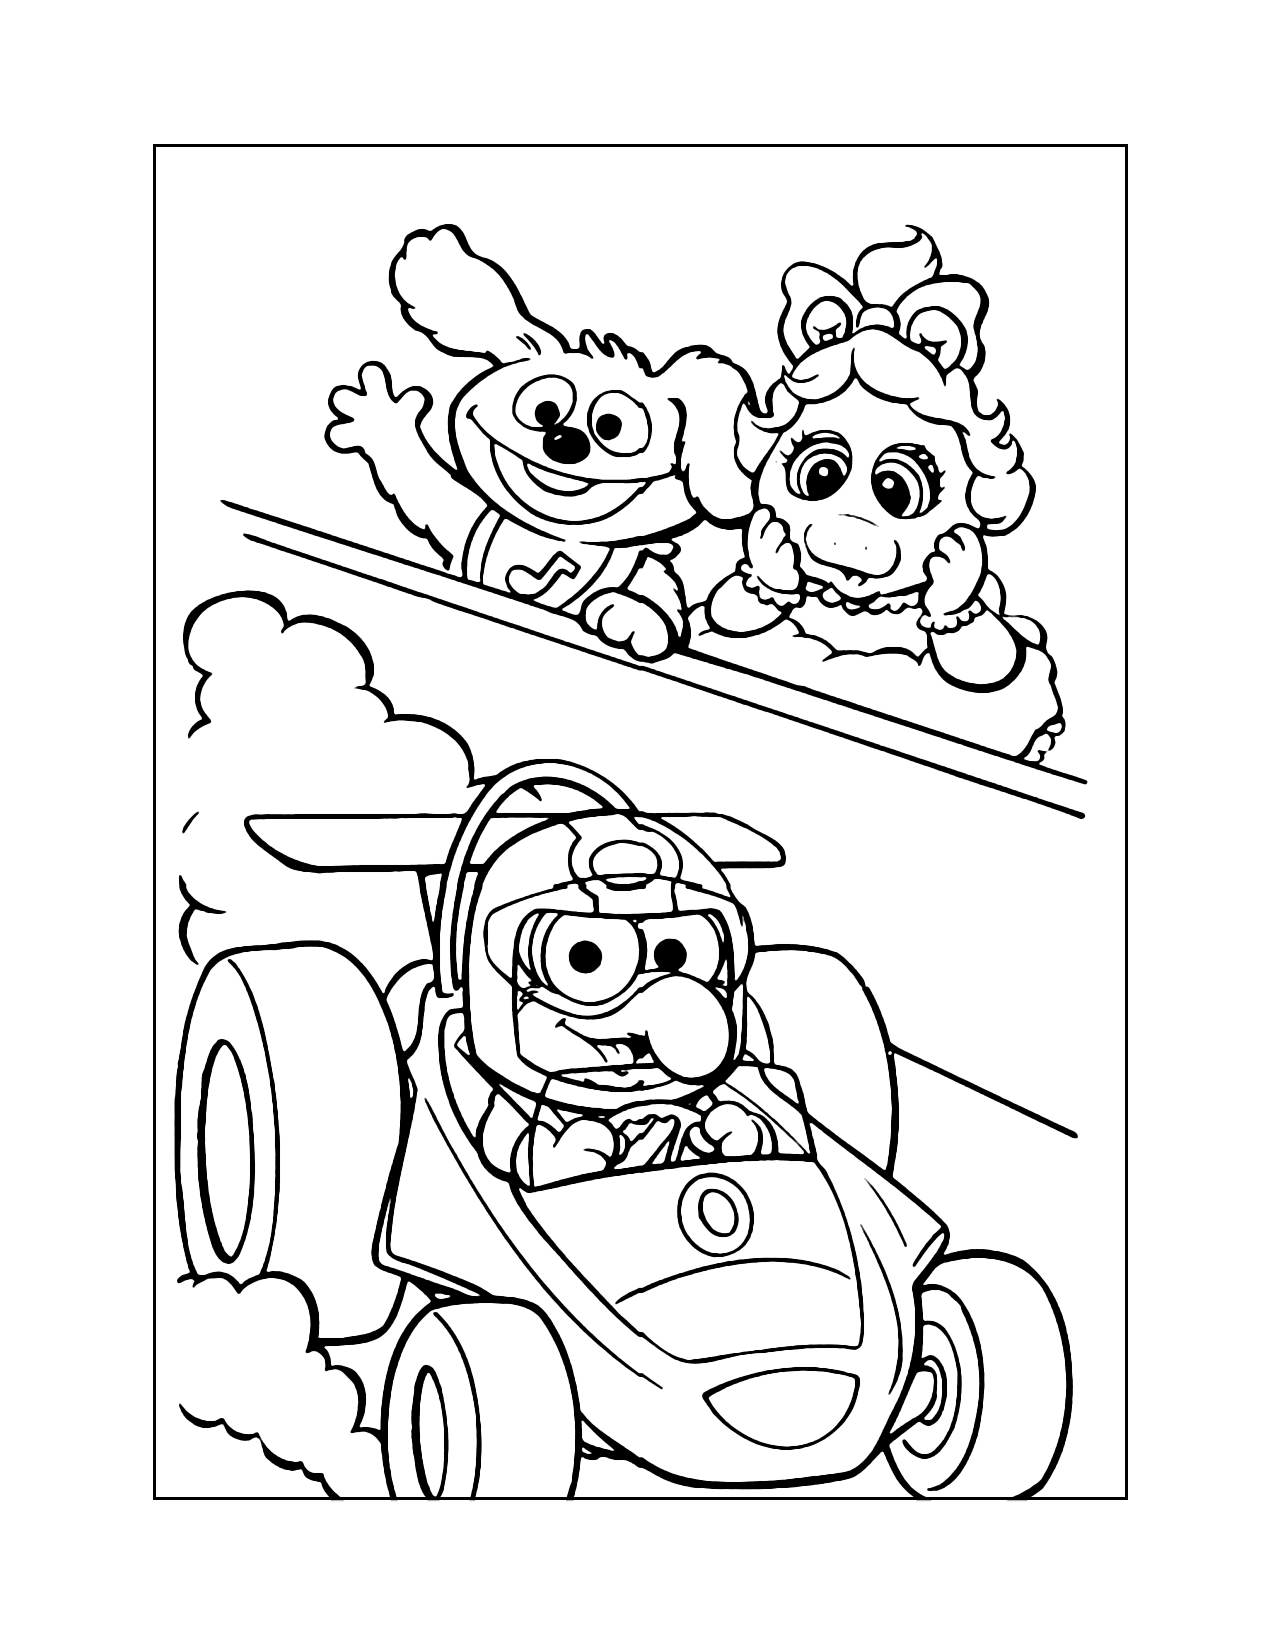 Baby Gonzo In A Racecar Coloring Page